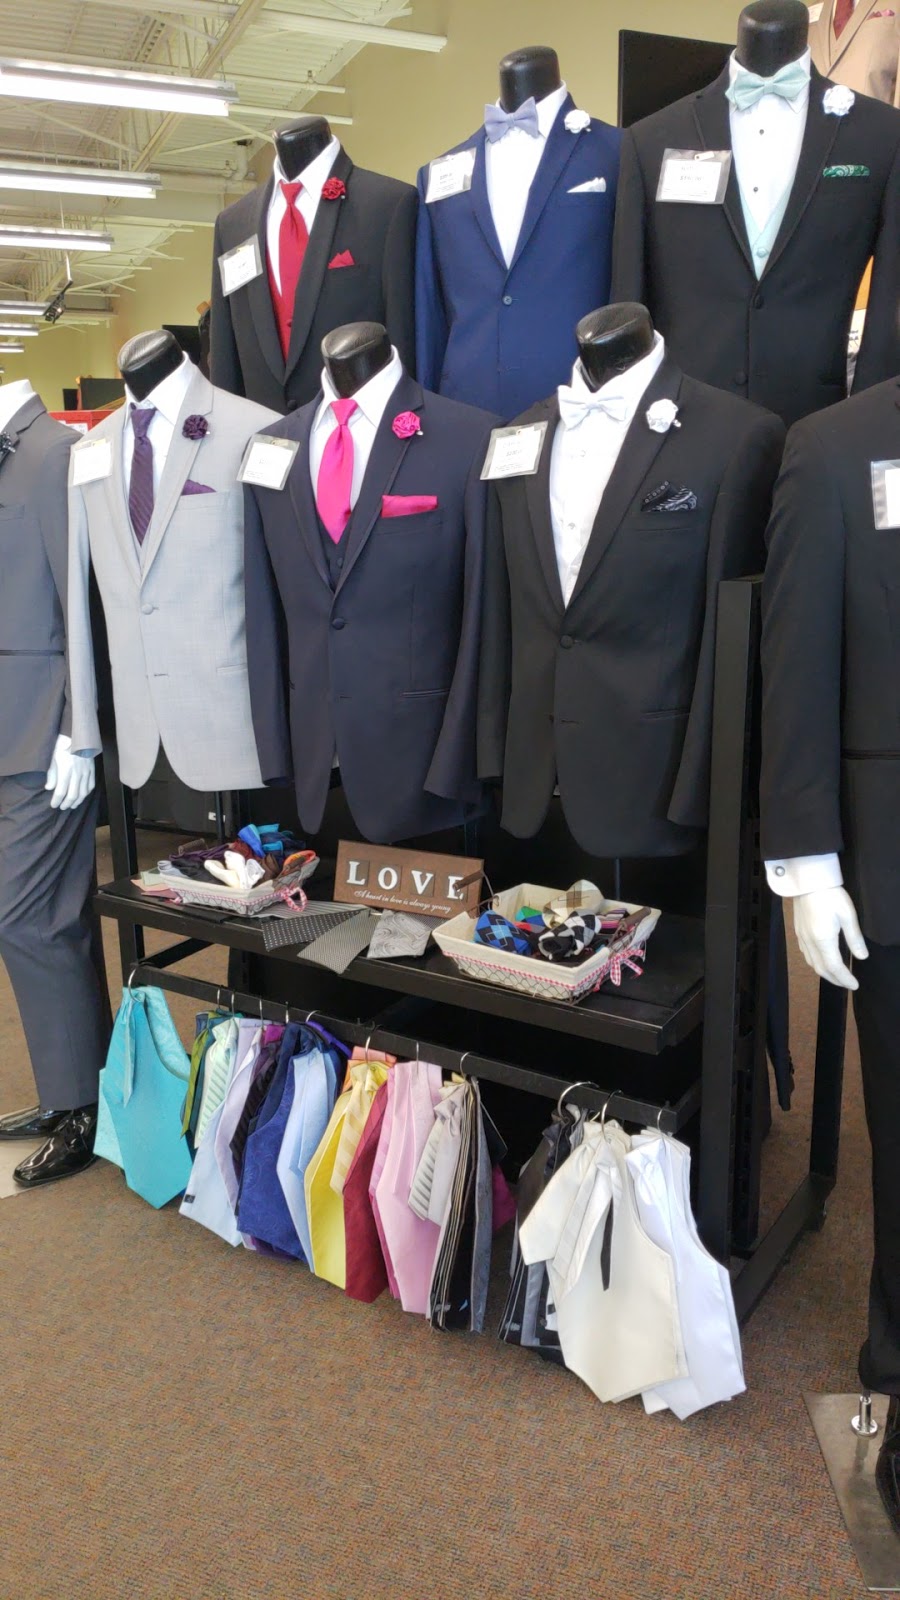 Moores Clothing for Men | clothing store | 12222 137 Ave NW, Edmonton, AB T5L 4X5, Canada | 7804566661 OR +1 780-456-6661